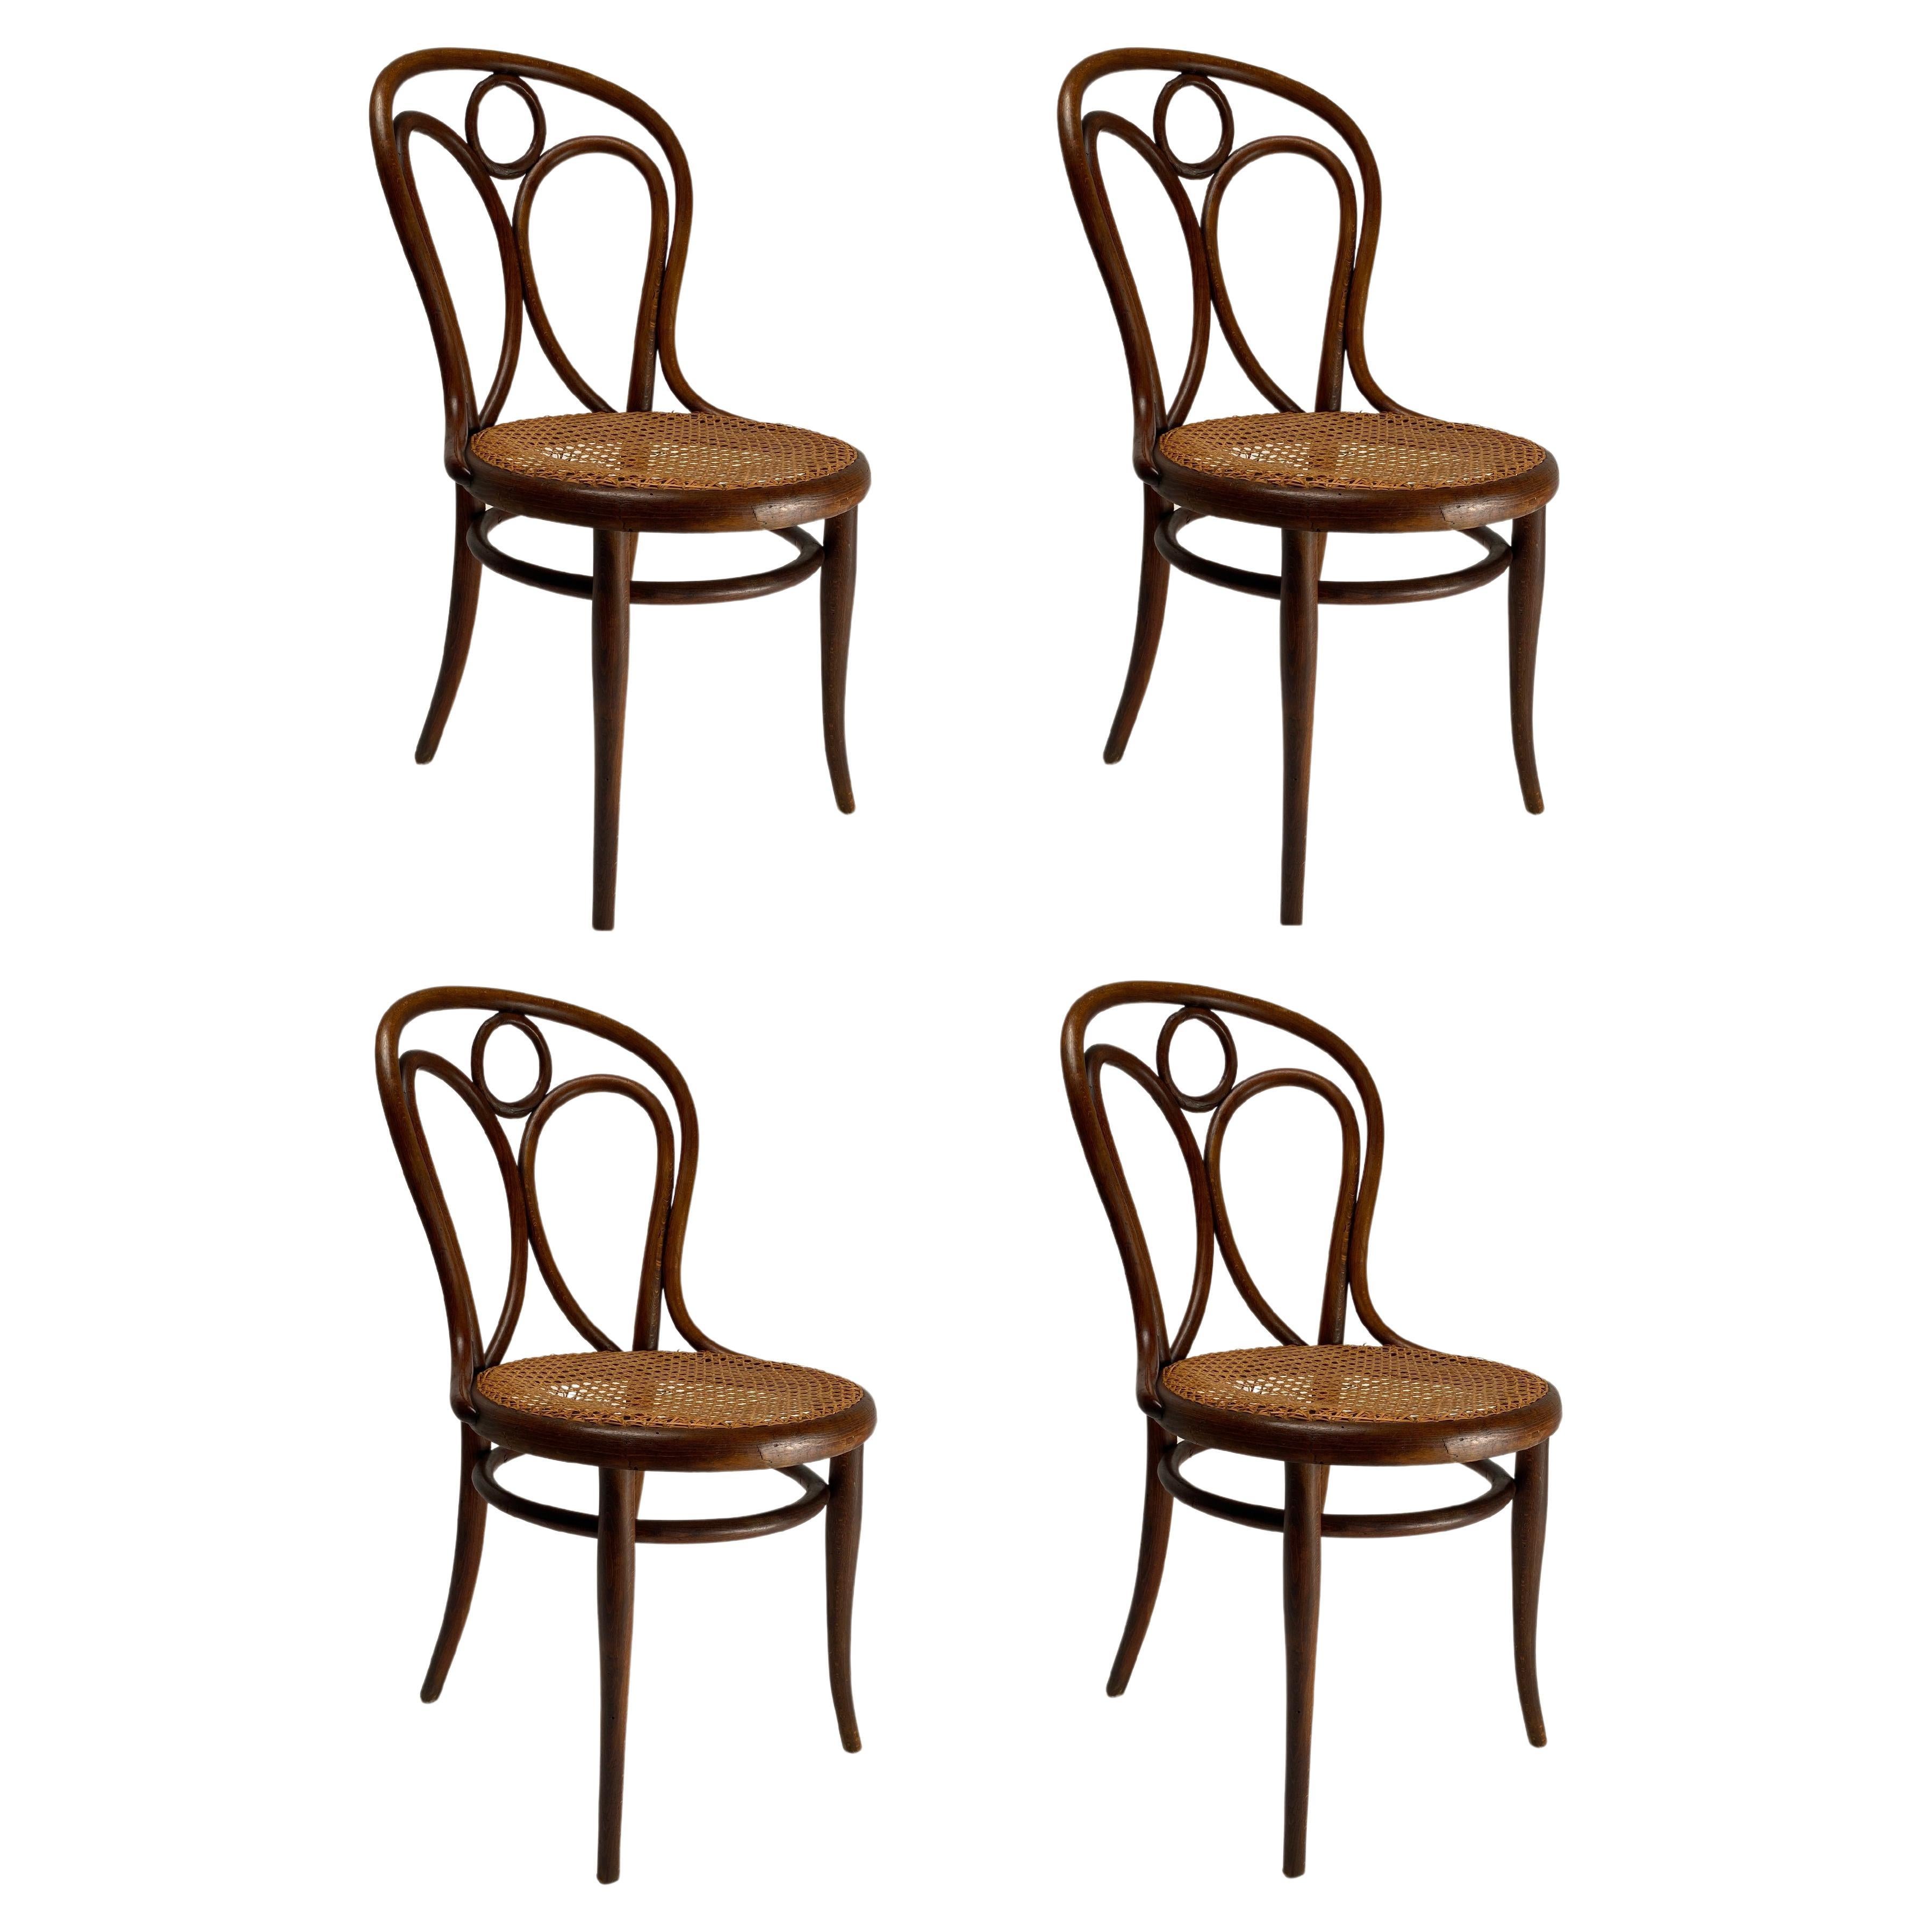 Set of 4 Thonet bent beech chairs, Austria, early 1900s